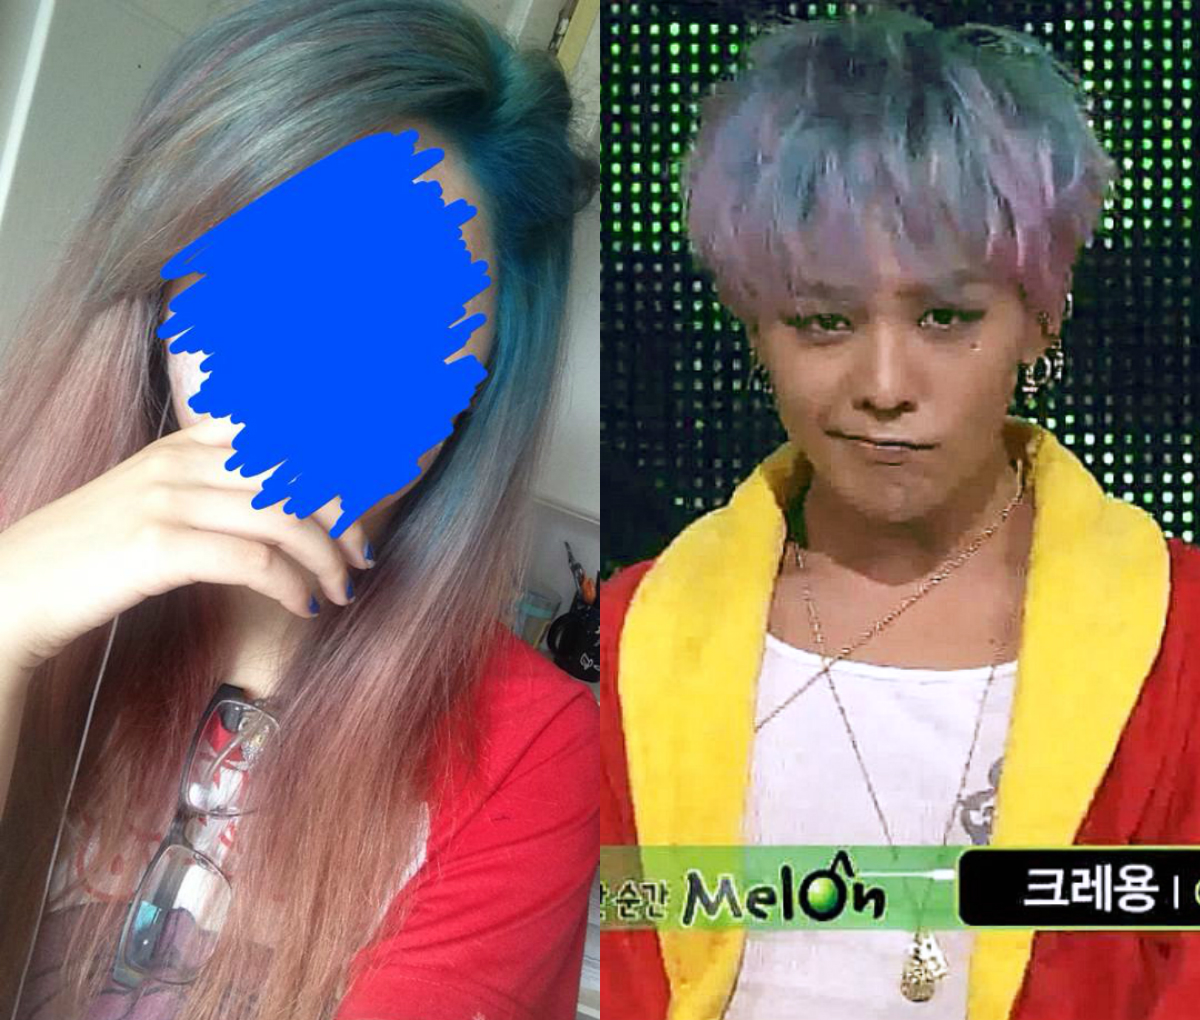 Kpop Inspired Hair G Dragon Crayon Blue And Pink Ombre Hair Michelle Cheung Beauty Fashion Food Birmingham Blog